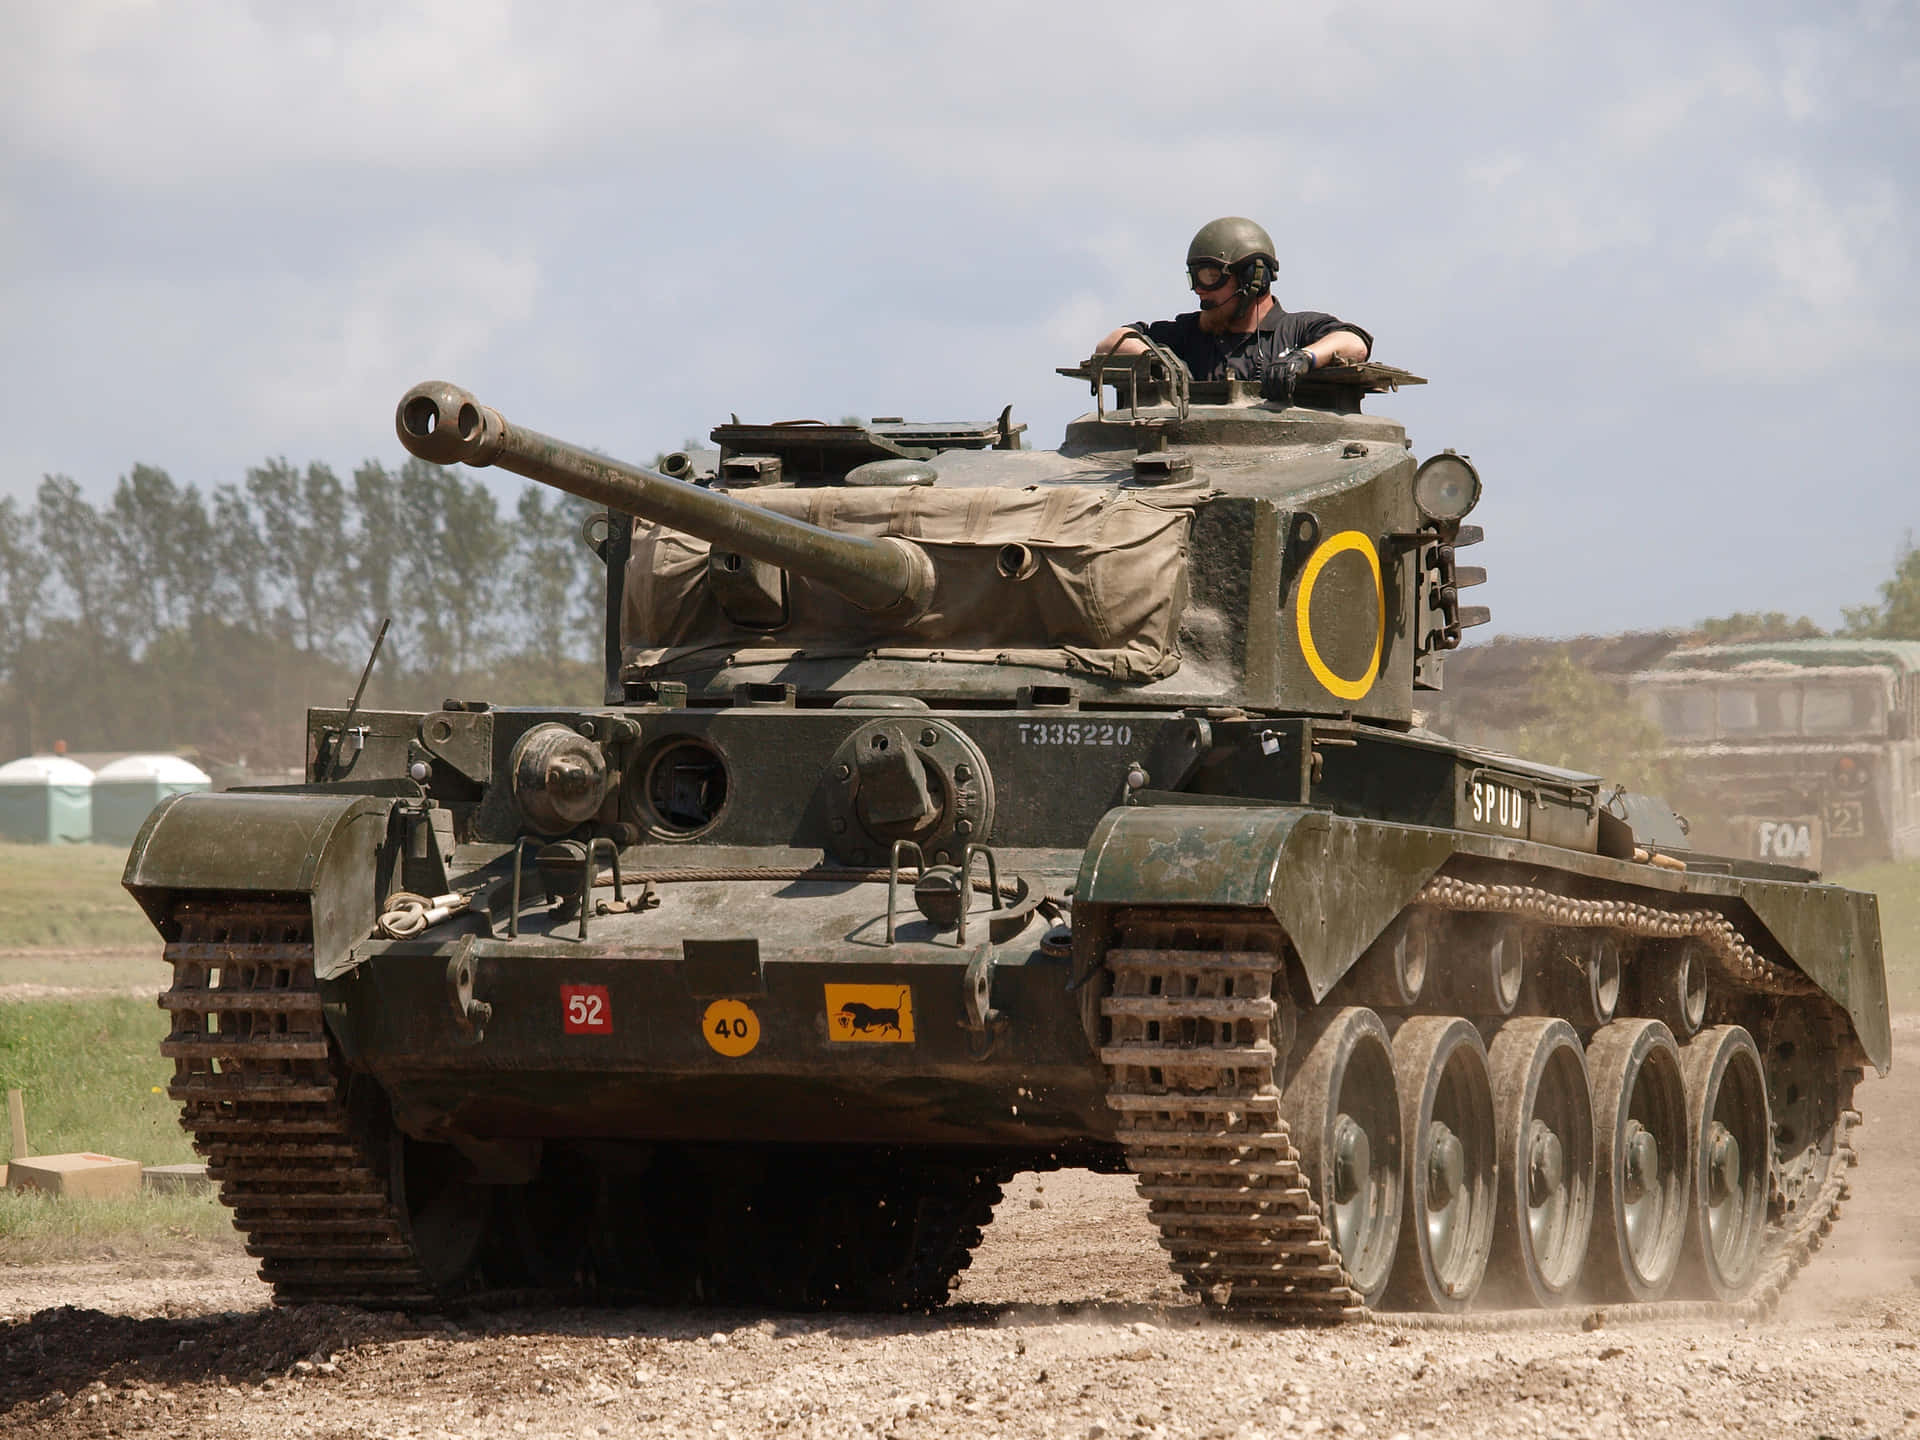 A tank on the battlefield with a man inside, ready to